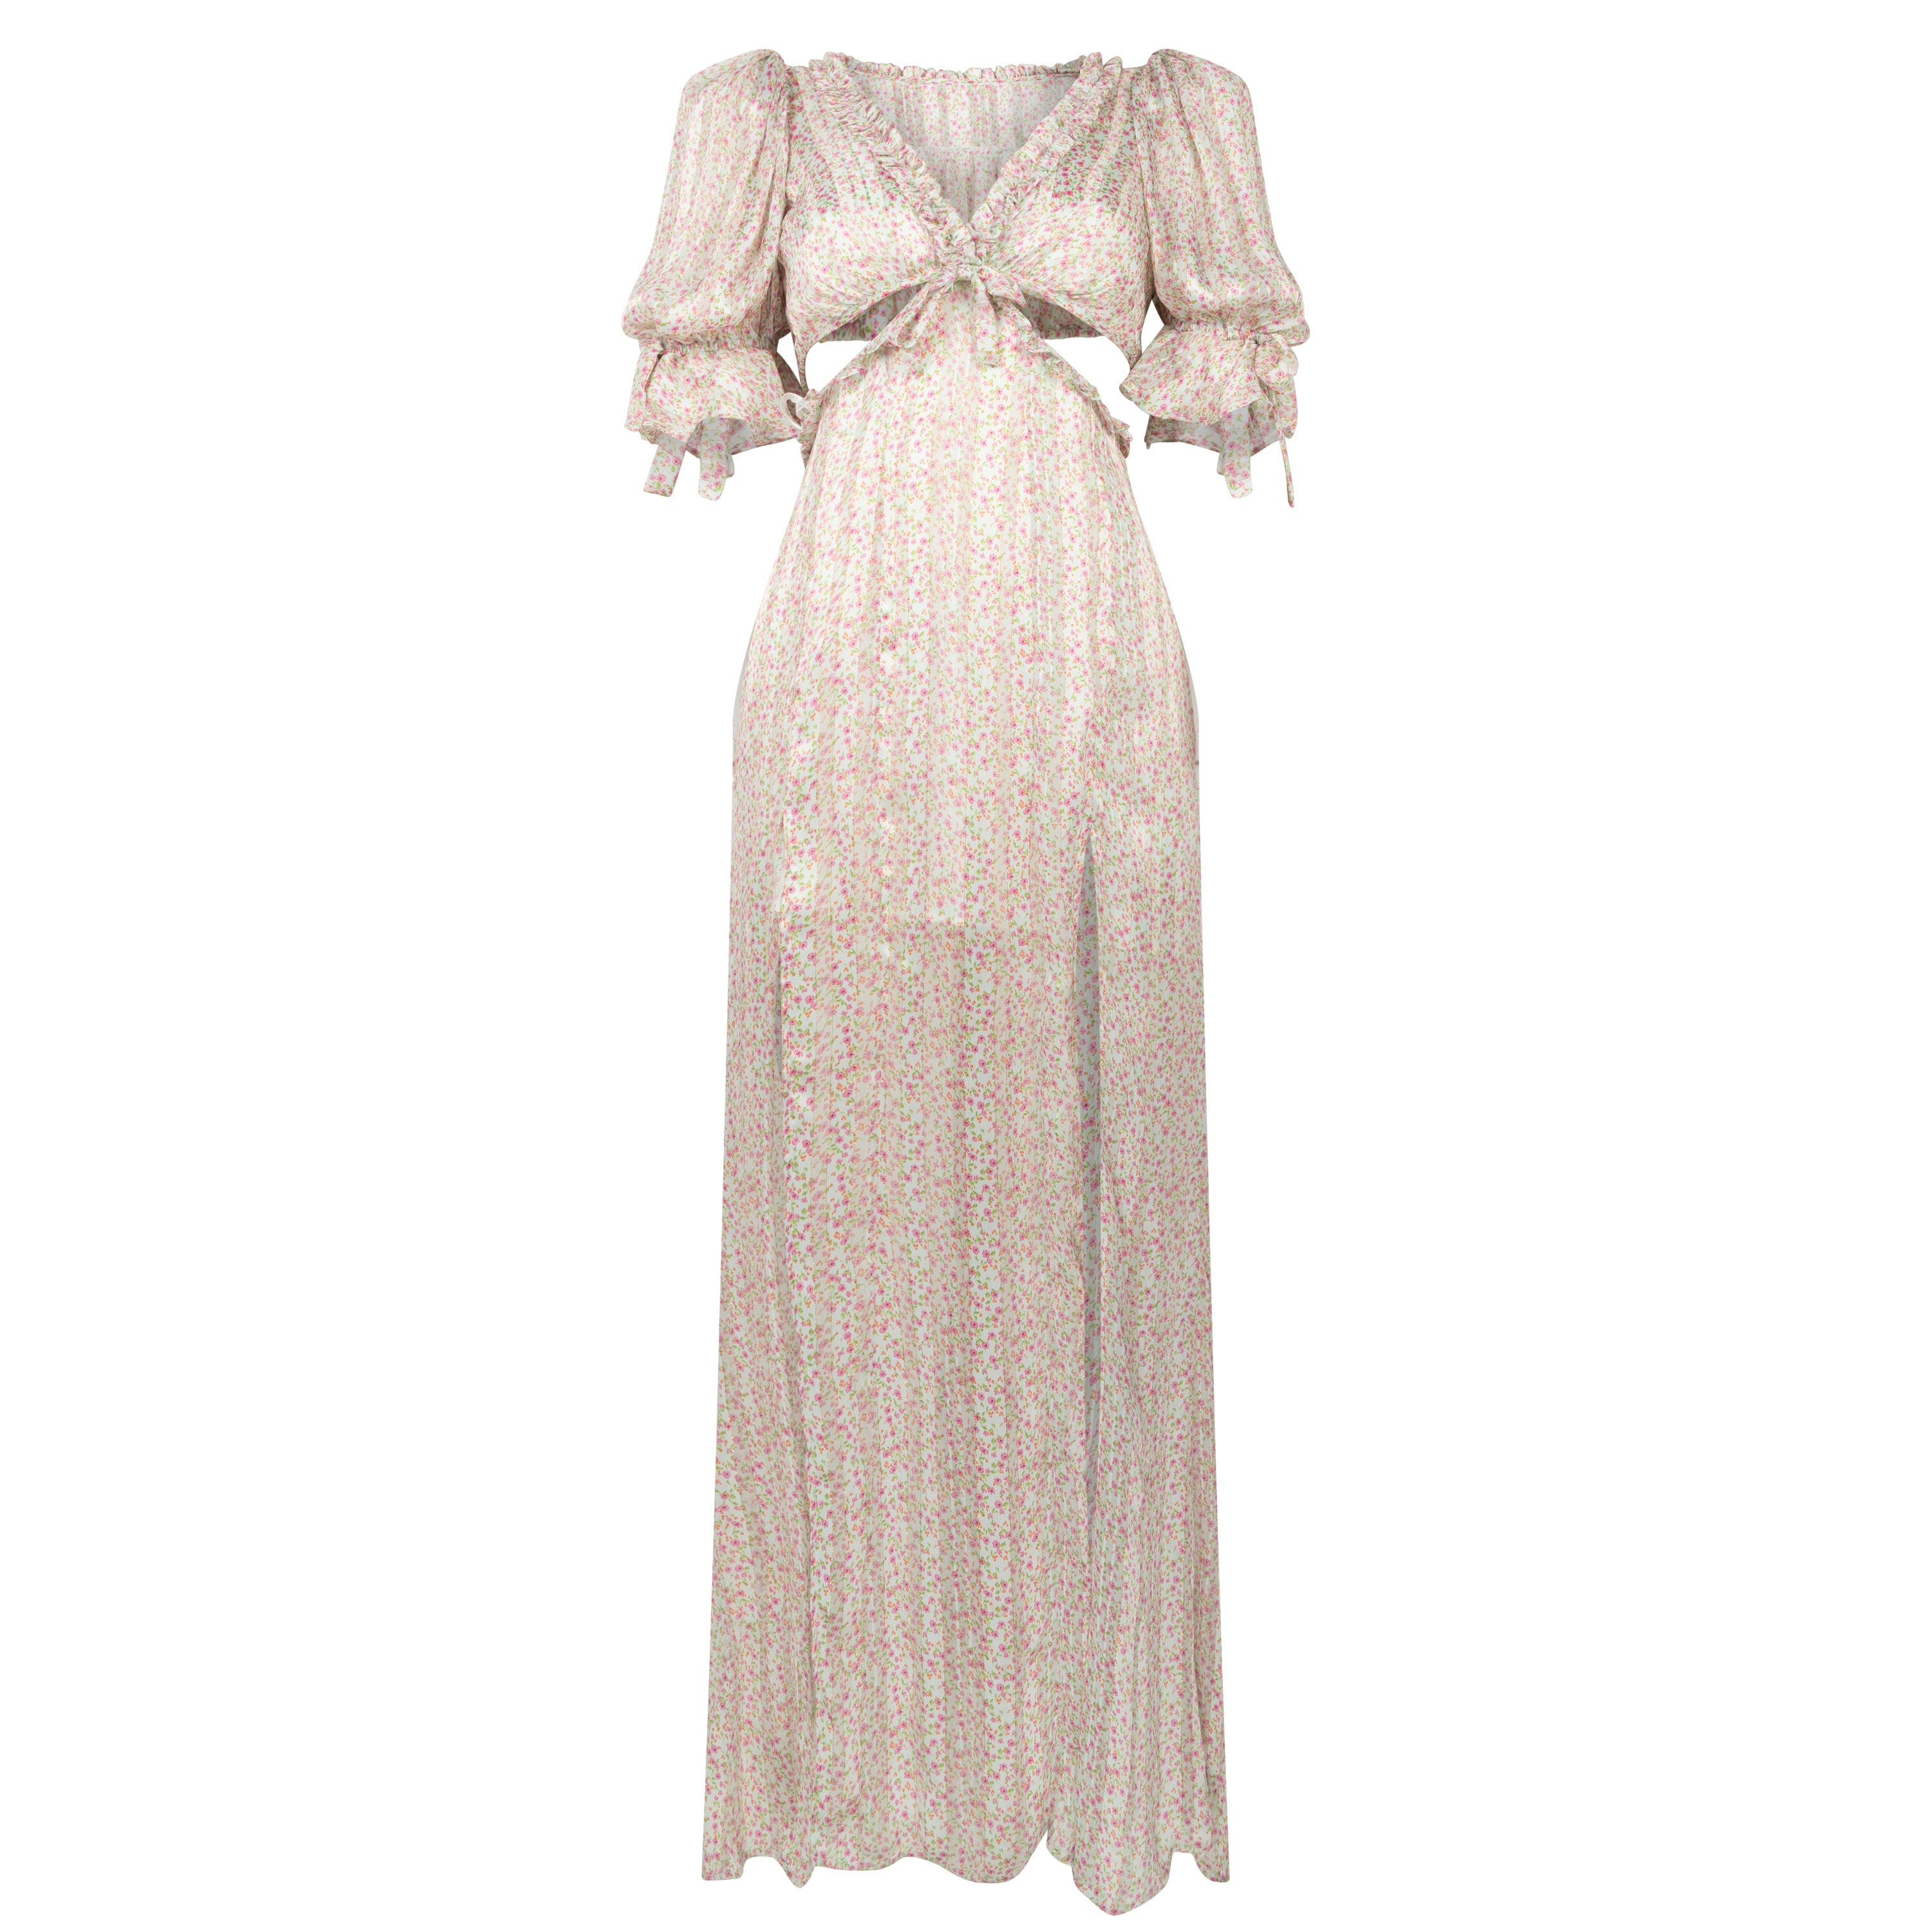 Rent for your upcoming holiday! Something Borrowed For Love &amp; Lemons Floral Maxi Dress with Slits to rent, kledingverhuur